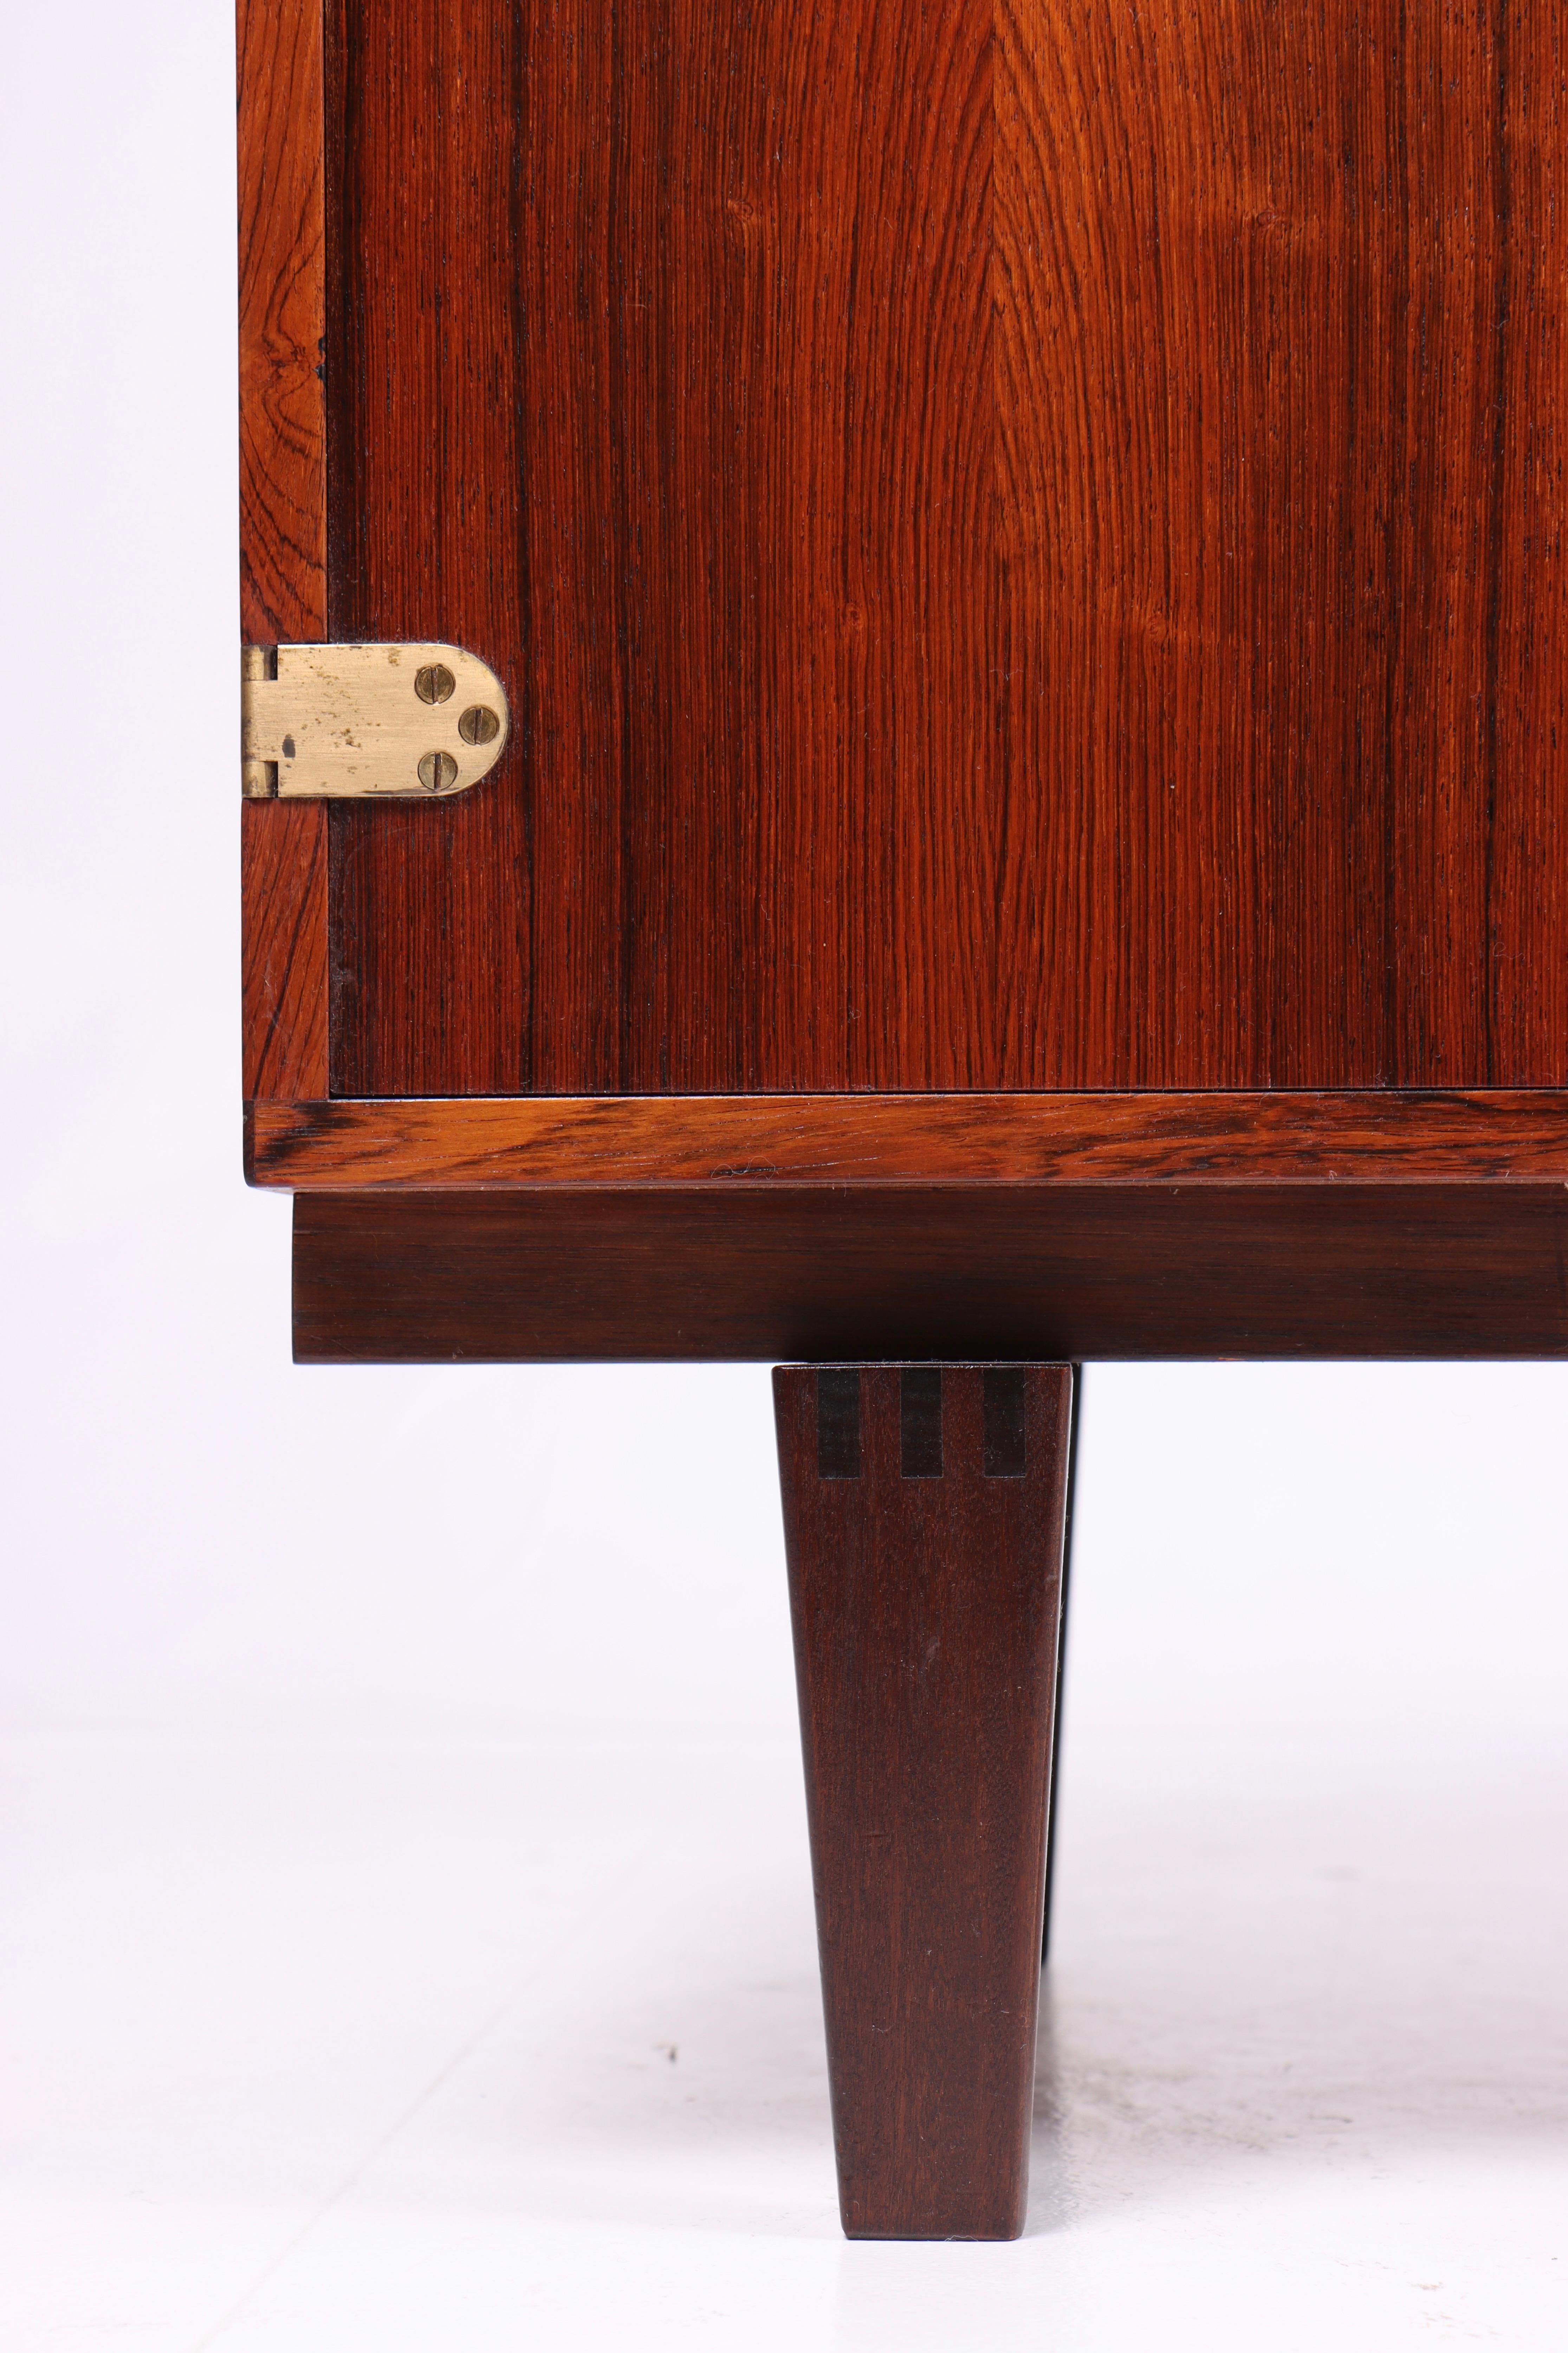 Scandinavian Modern Midcentury Low Cabinet in Rosewood with Brass Hardware by Løgvig, Denmark, 1960s For Sale